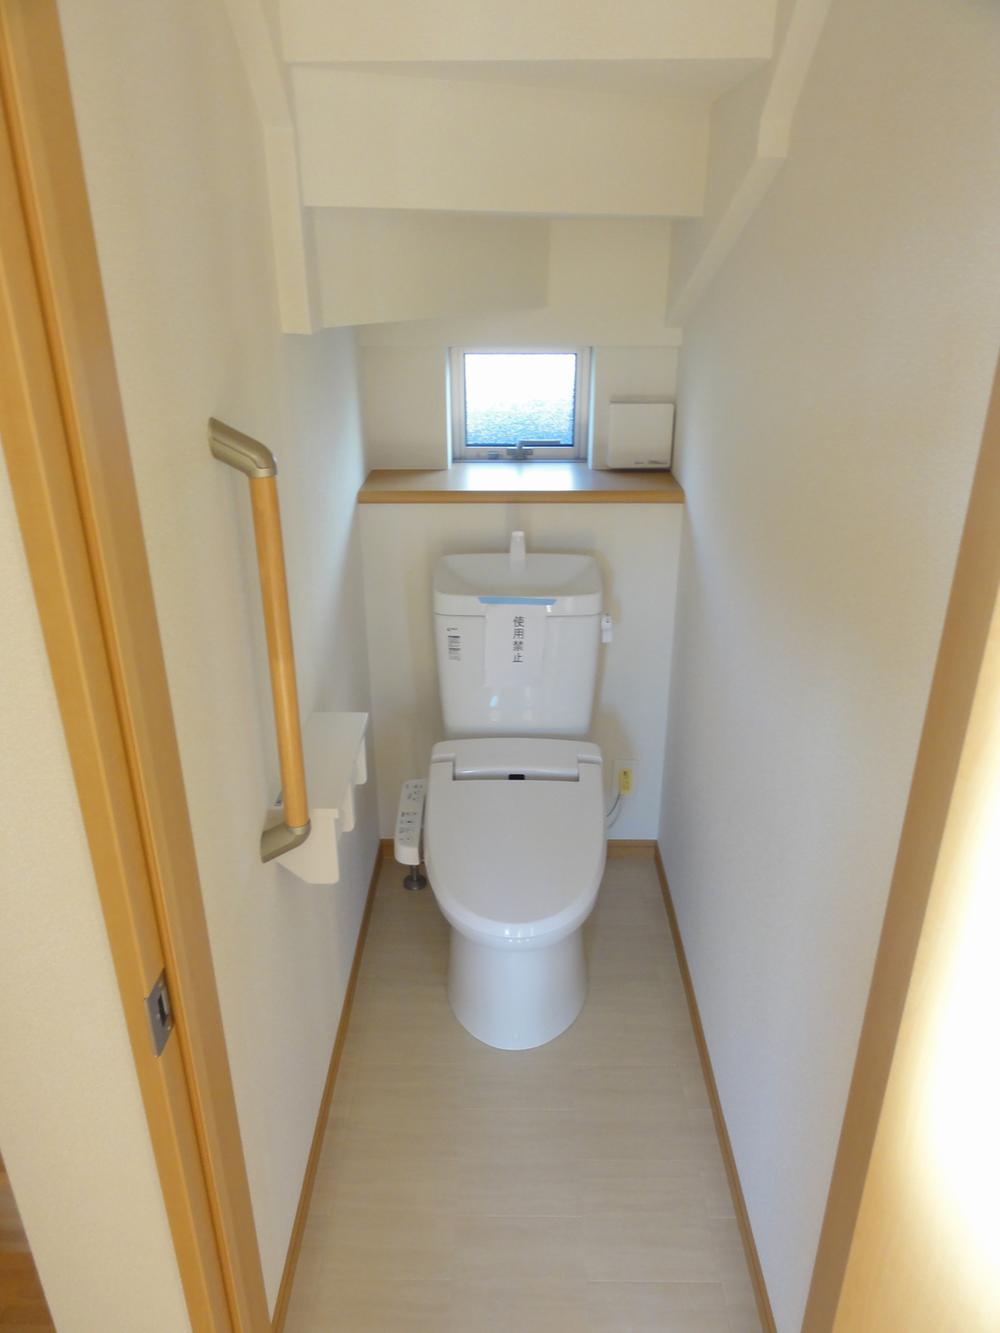 Toilet. Indoor (10 May 2013) Shooting With Washlet